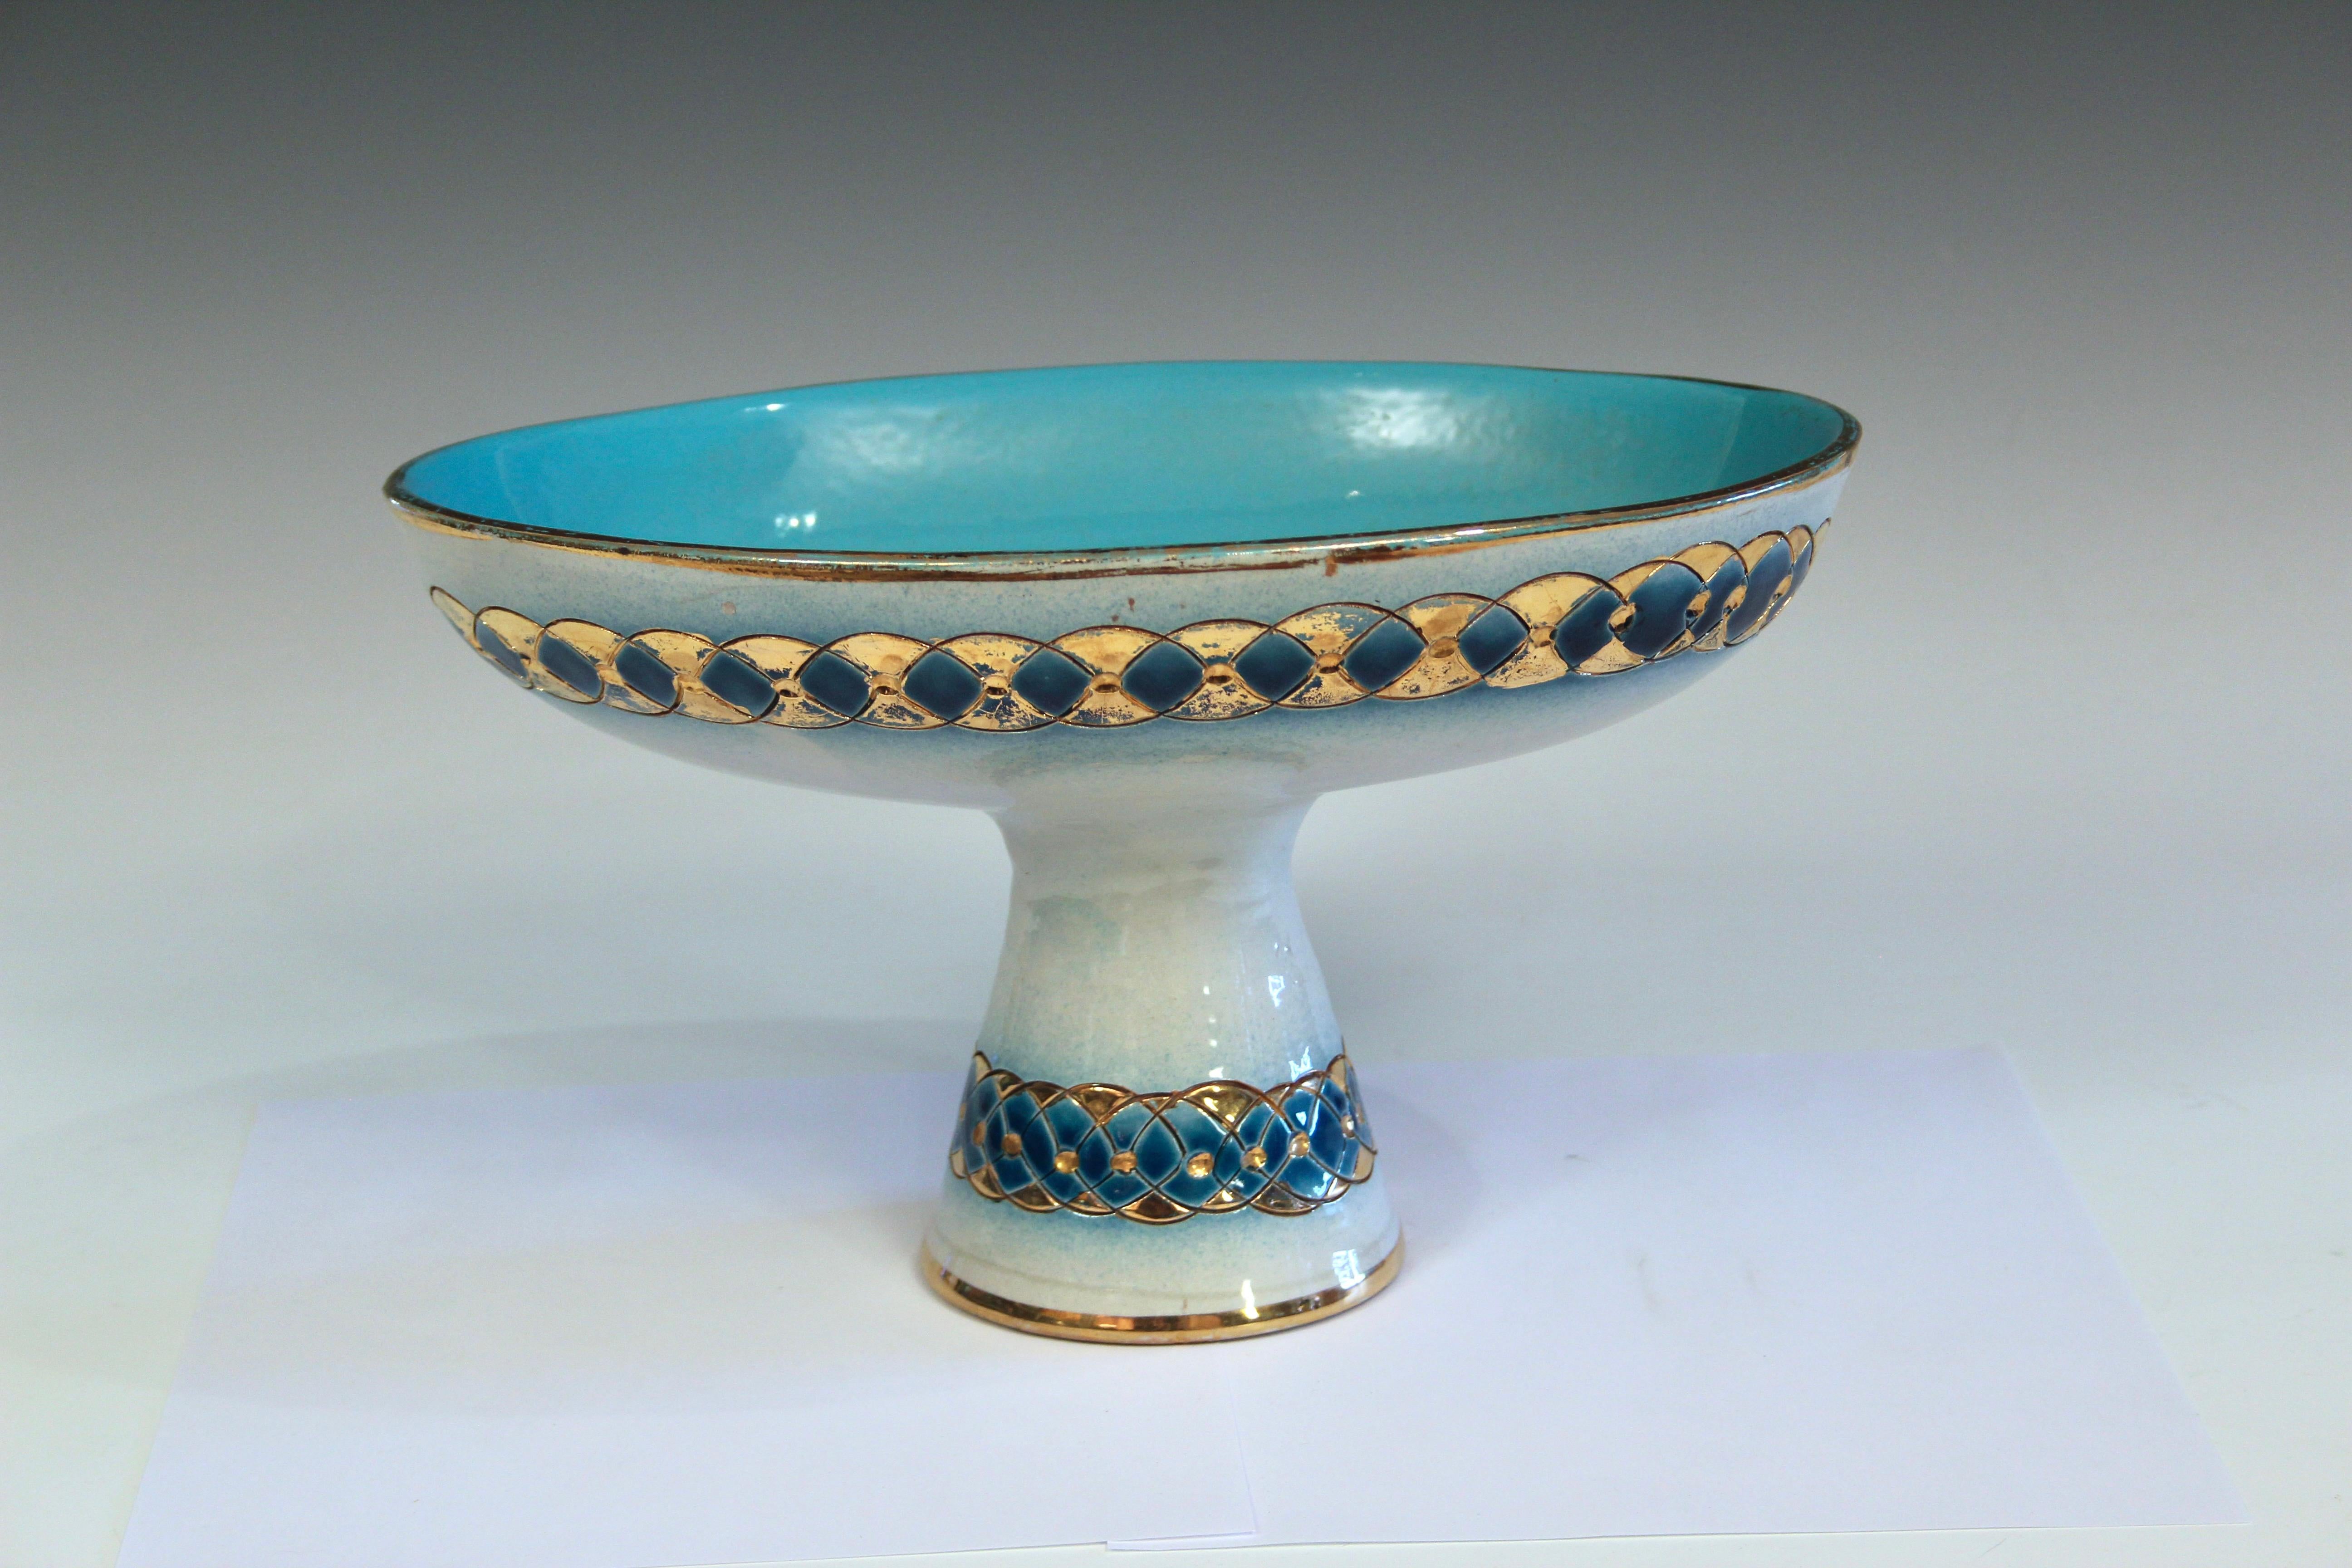 Stylish Bitossi pottery compote in blue and white and gold with impressed bands of overlapping geometrics. Circa 1960's. 12